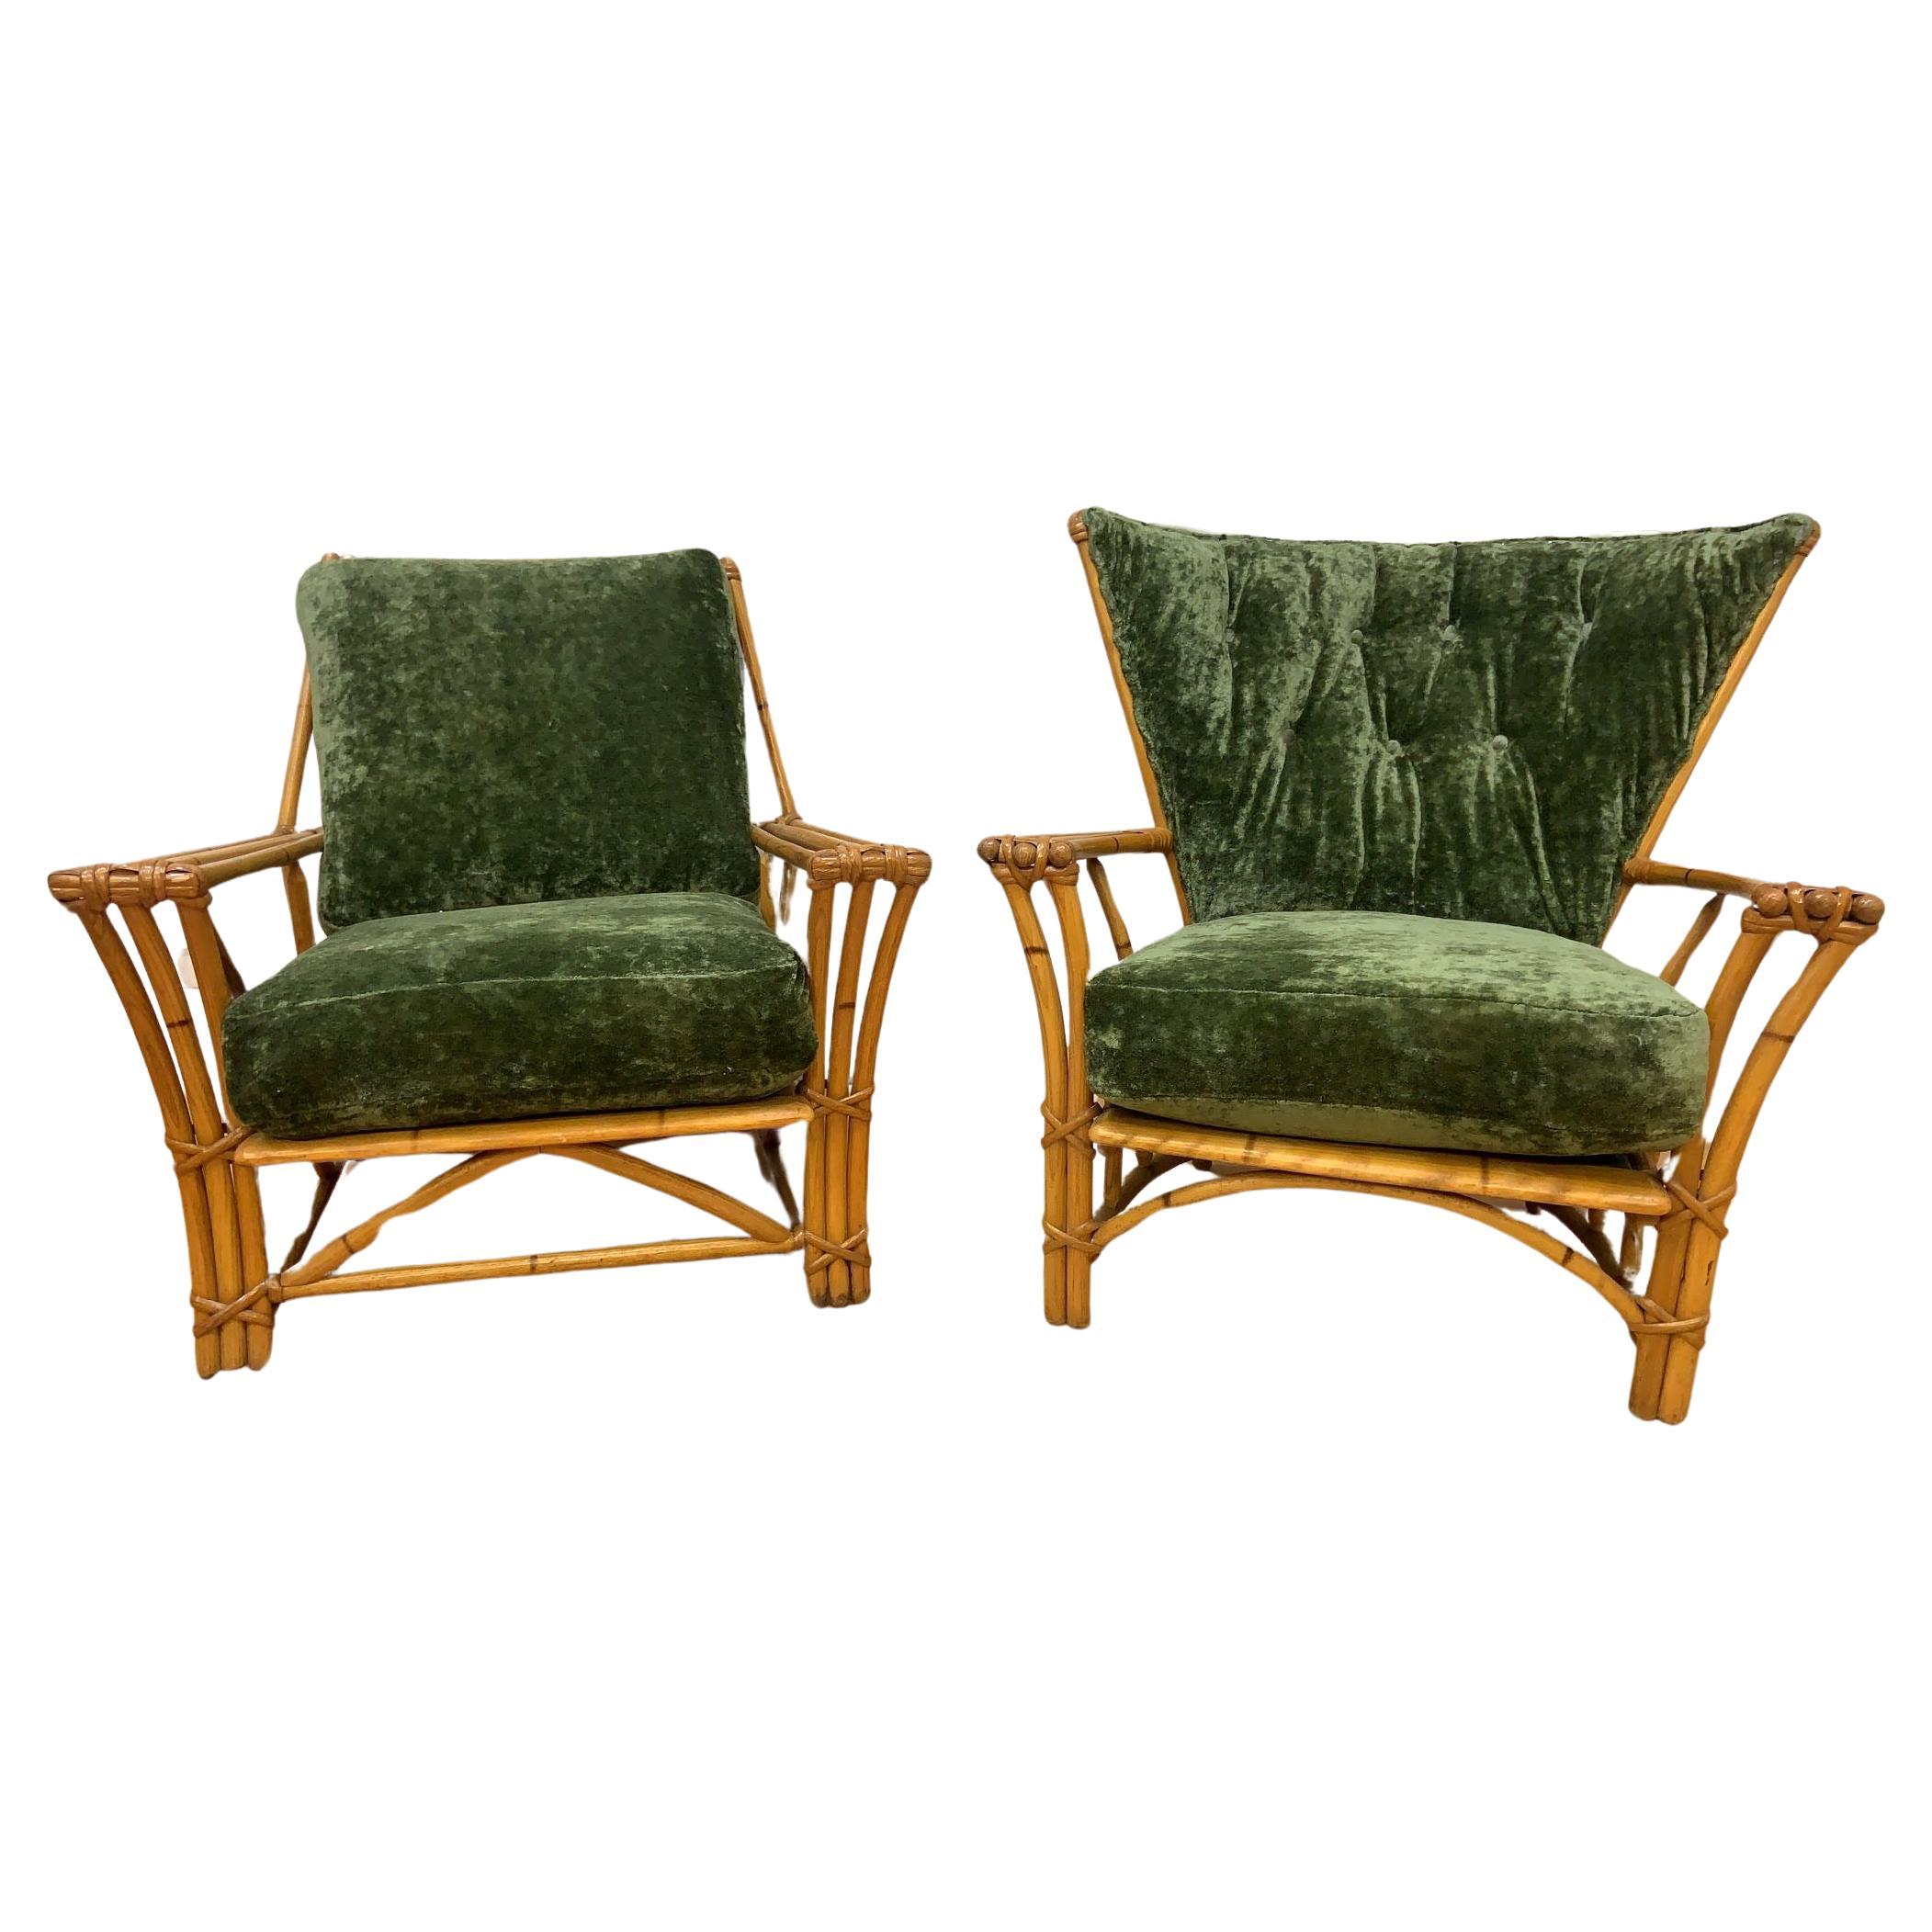 MCM Heywood Wakefield Ashcraft Rattan Lounge Chairs Newly Upholstered - Set of 2